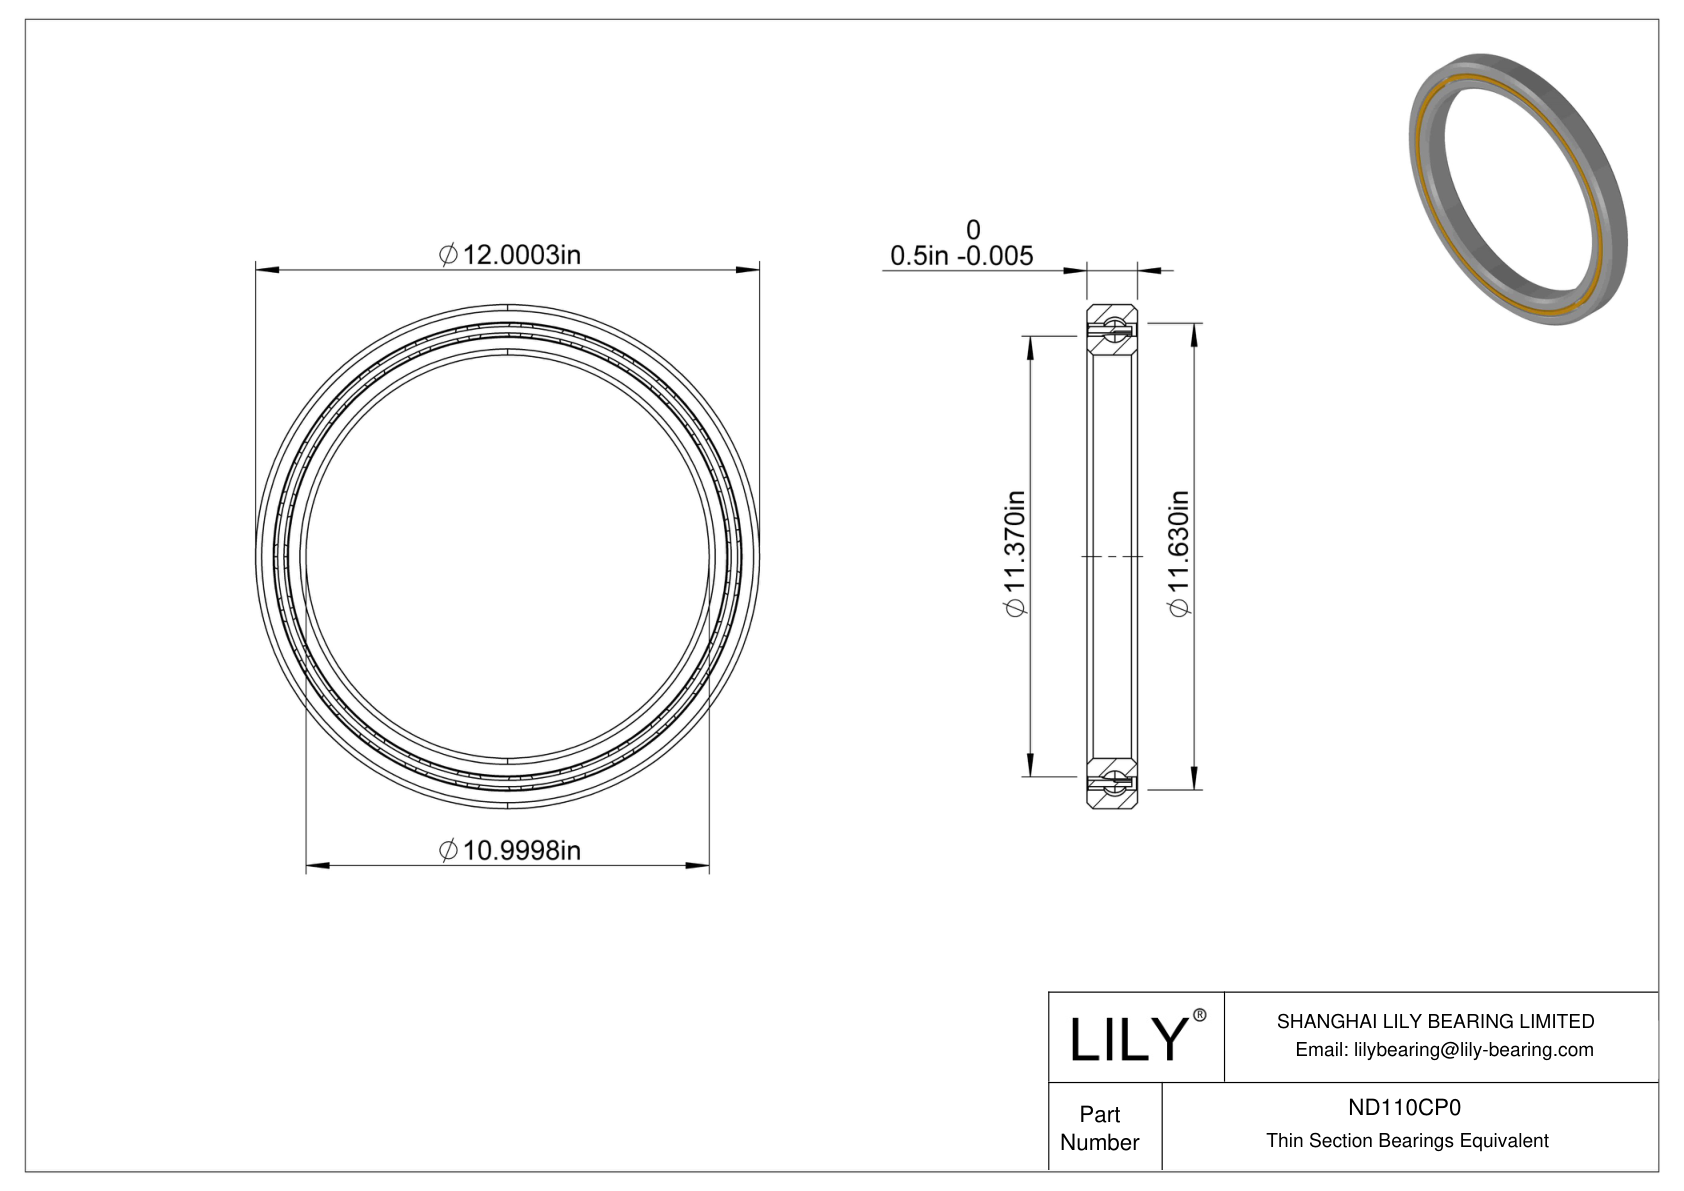 ND110CP0 Constant Section (CS) Bearings cad drawing